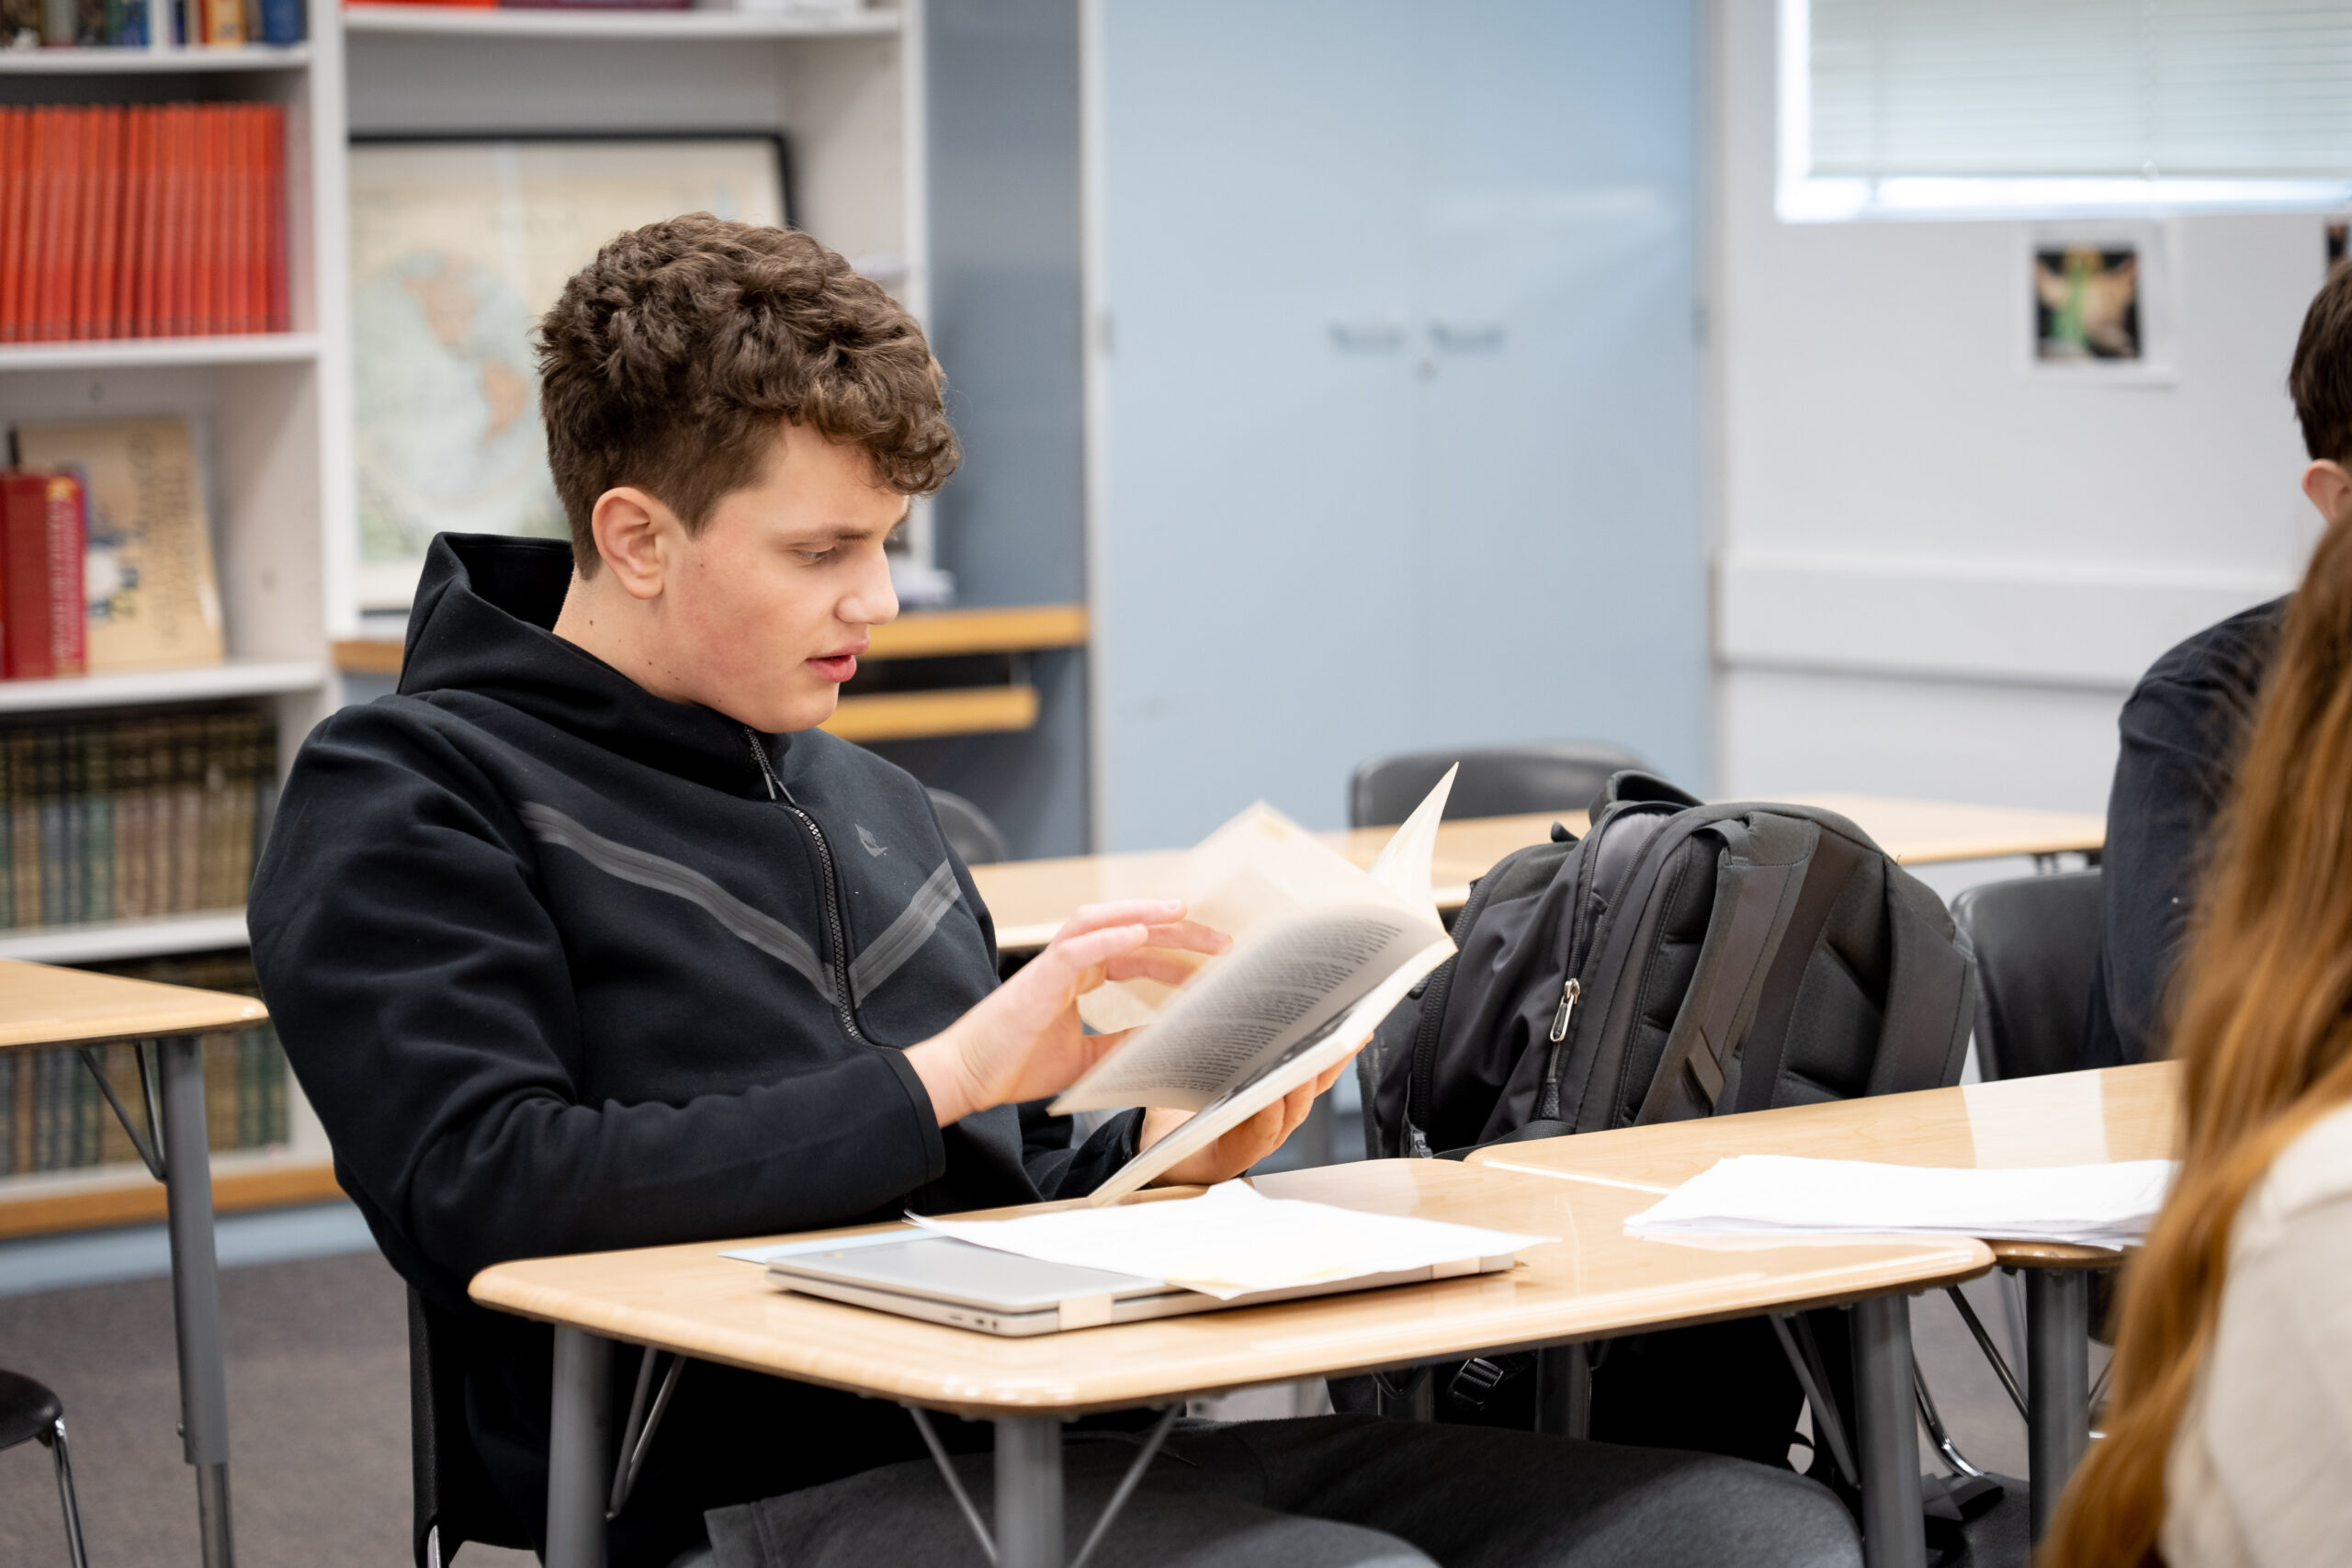 High school student reading during class